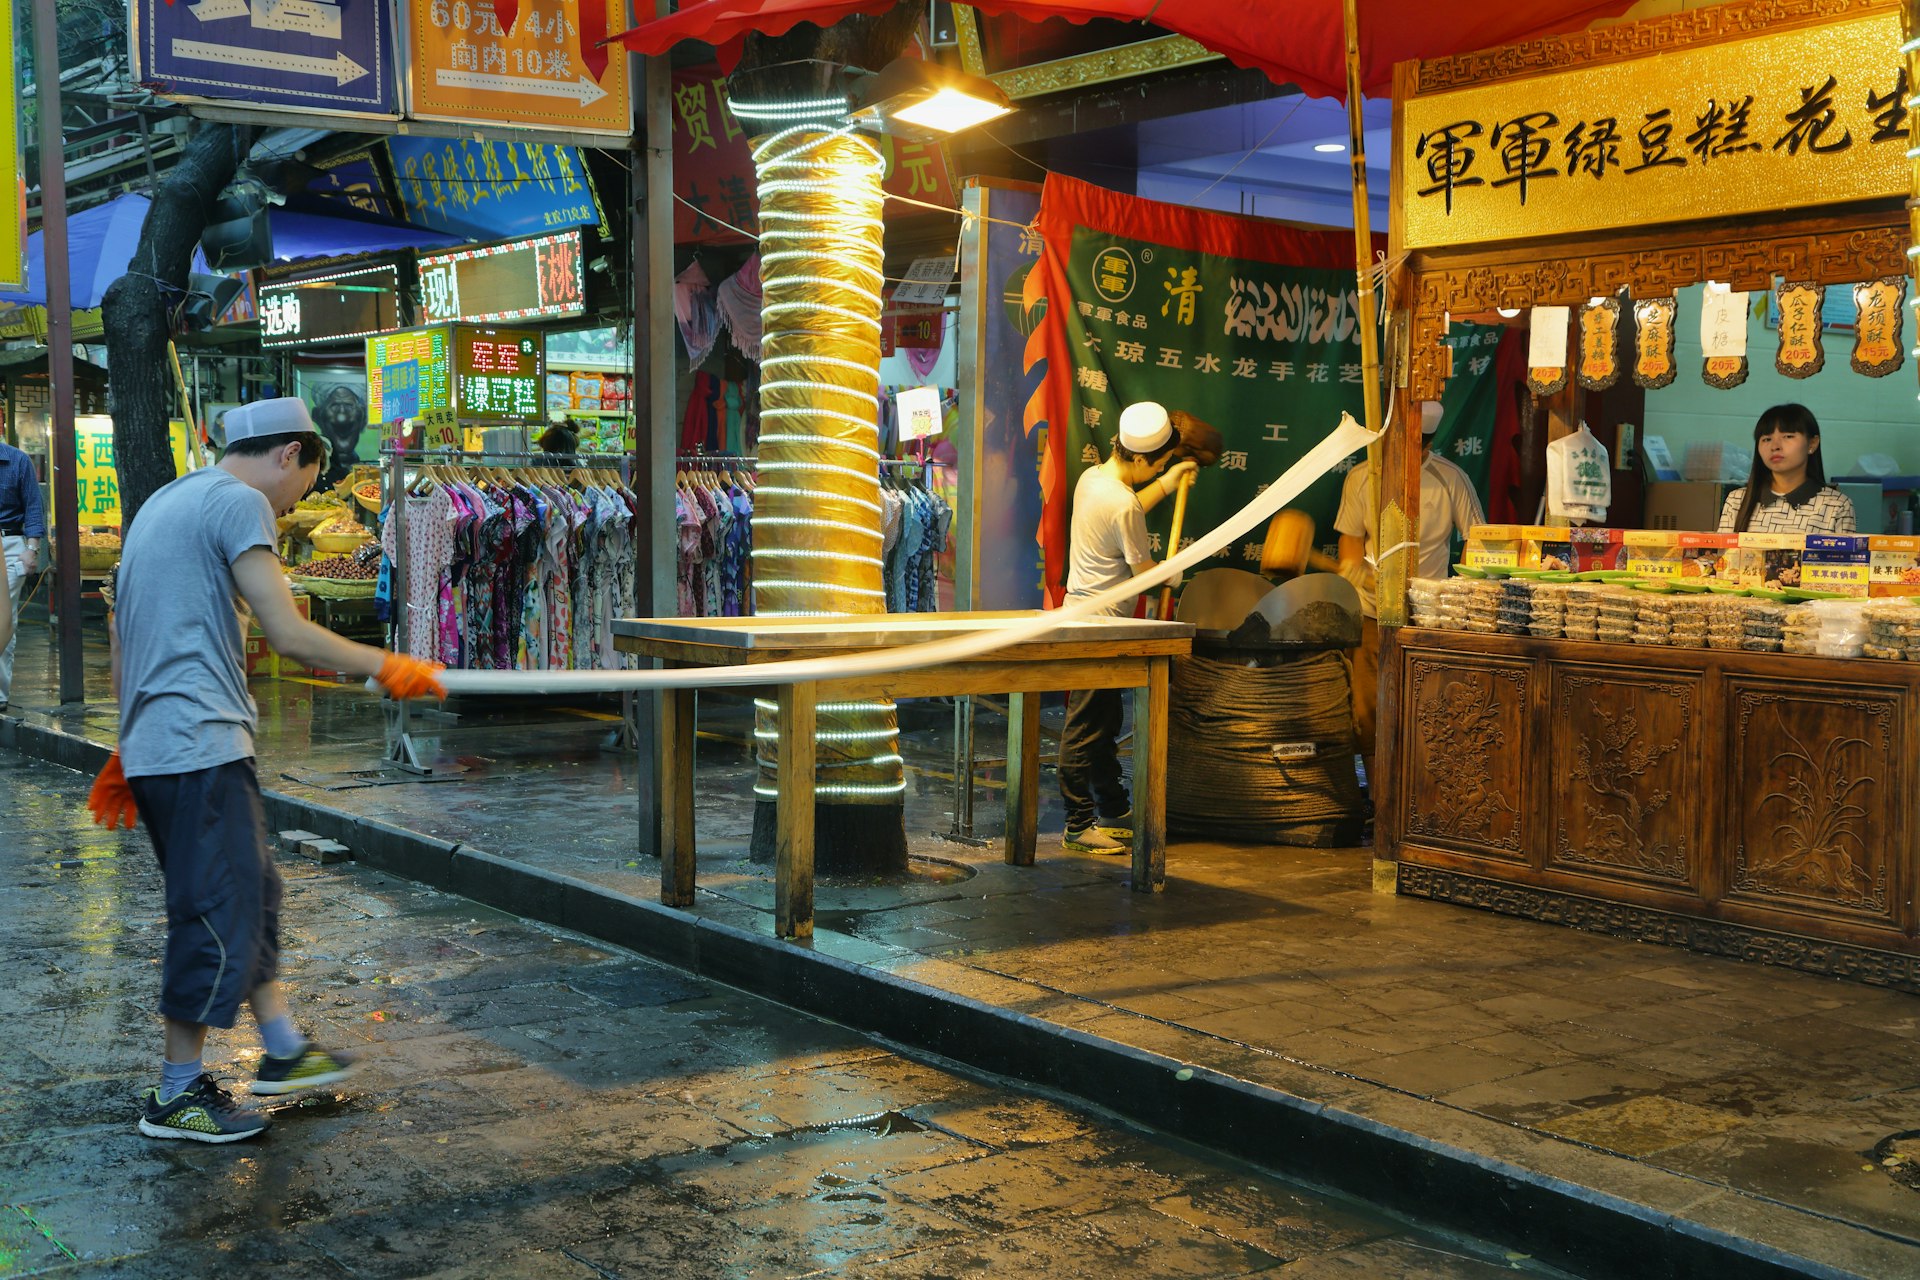 Unidentified man making handmade noodles in a food store on a rainy day in the Muslim Quarter of Xian, China.